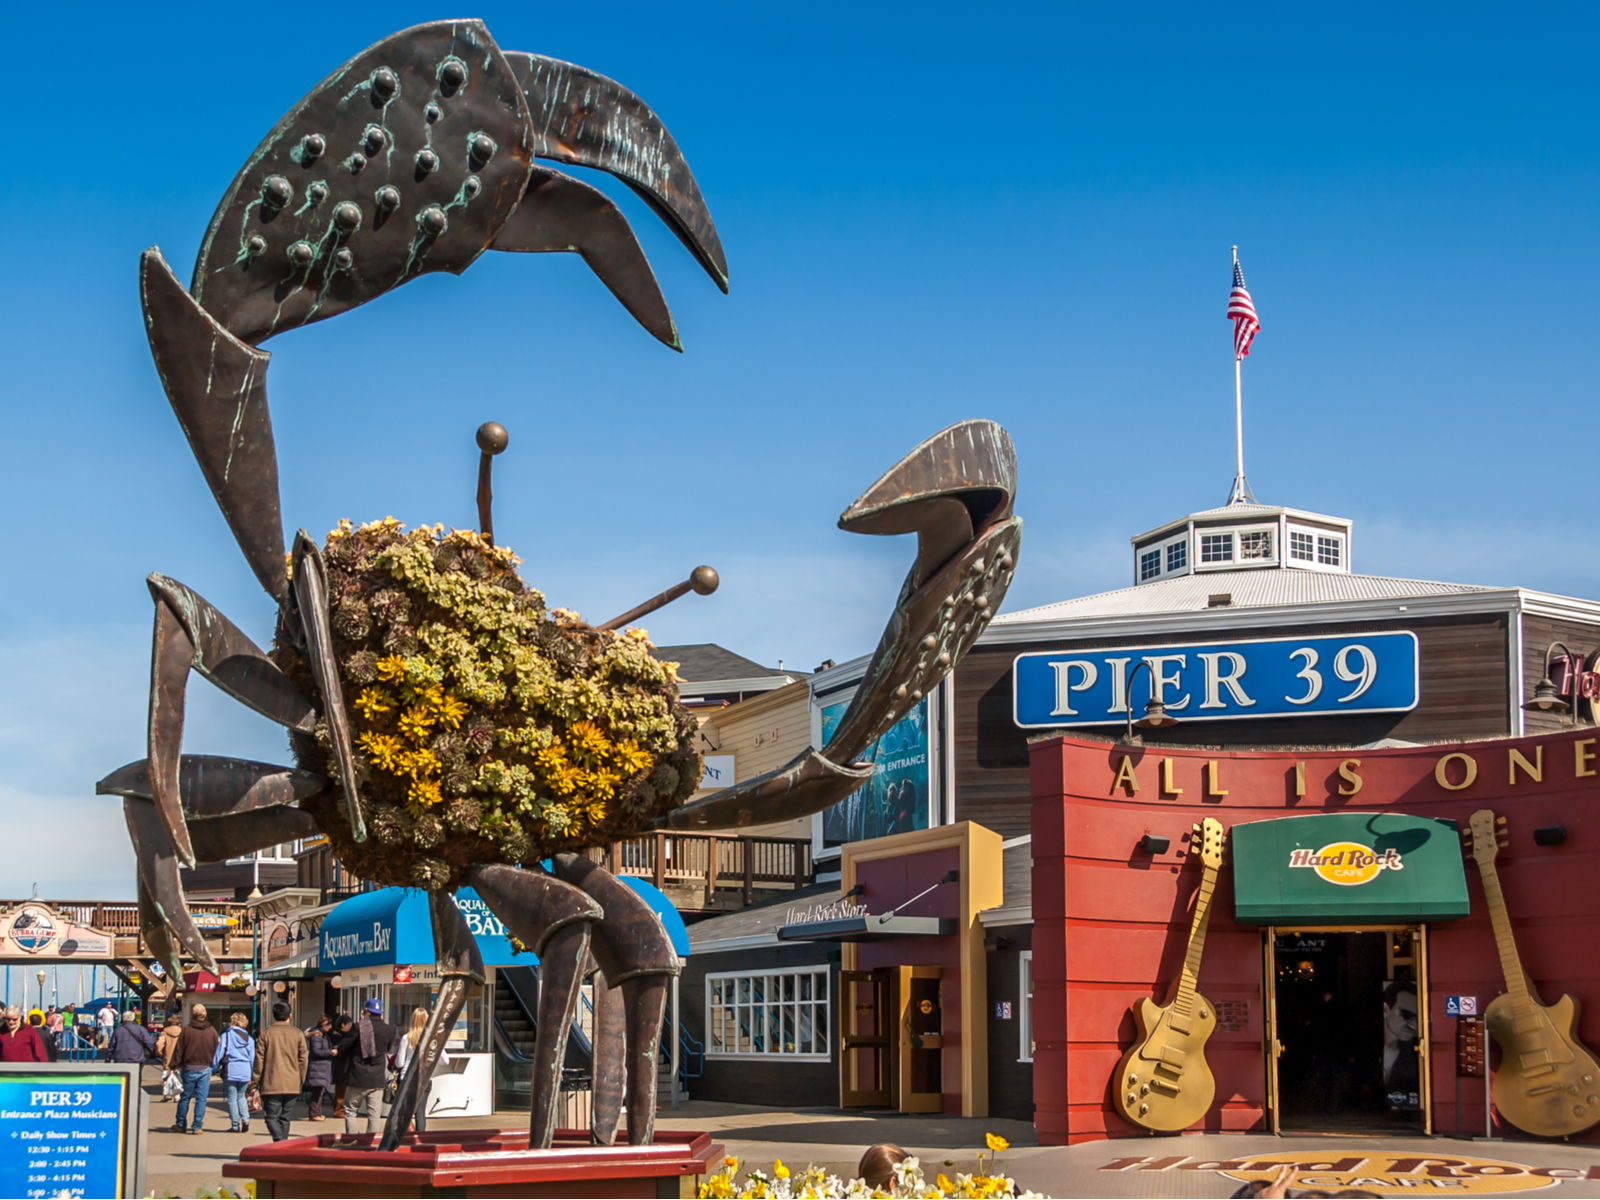 Image of a giant crab sculpture at the Fisherman's Wharf at Pier 39 during the best time to visit San Francisco with blue skies